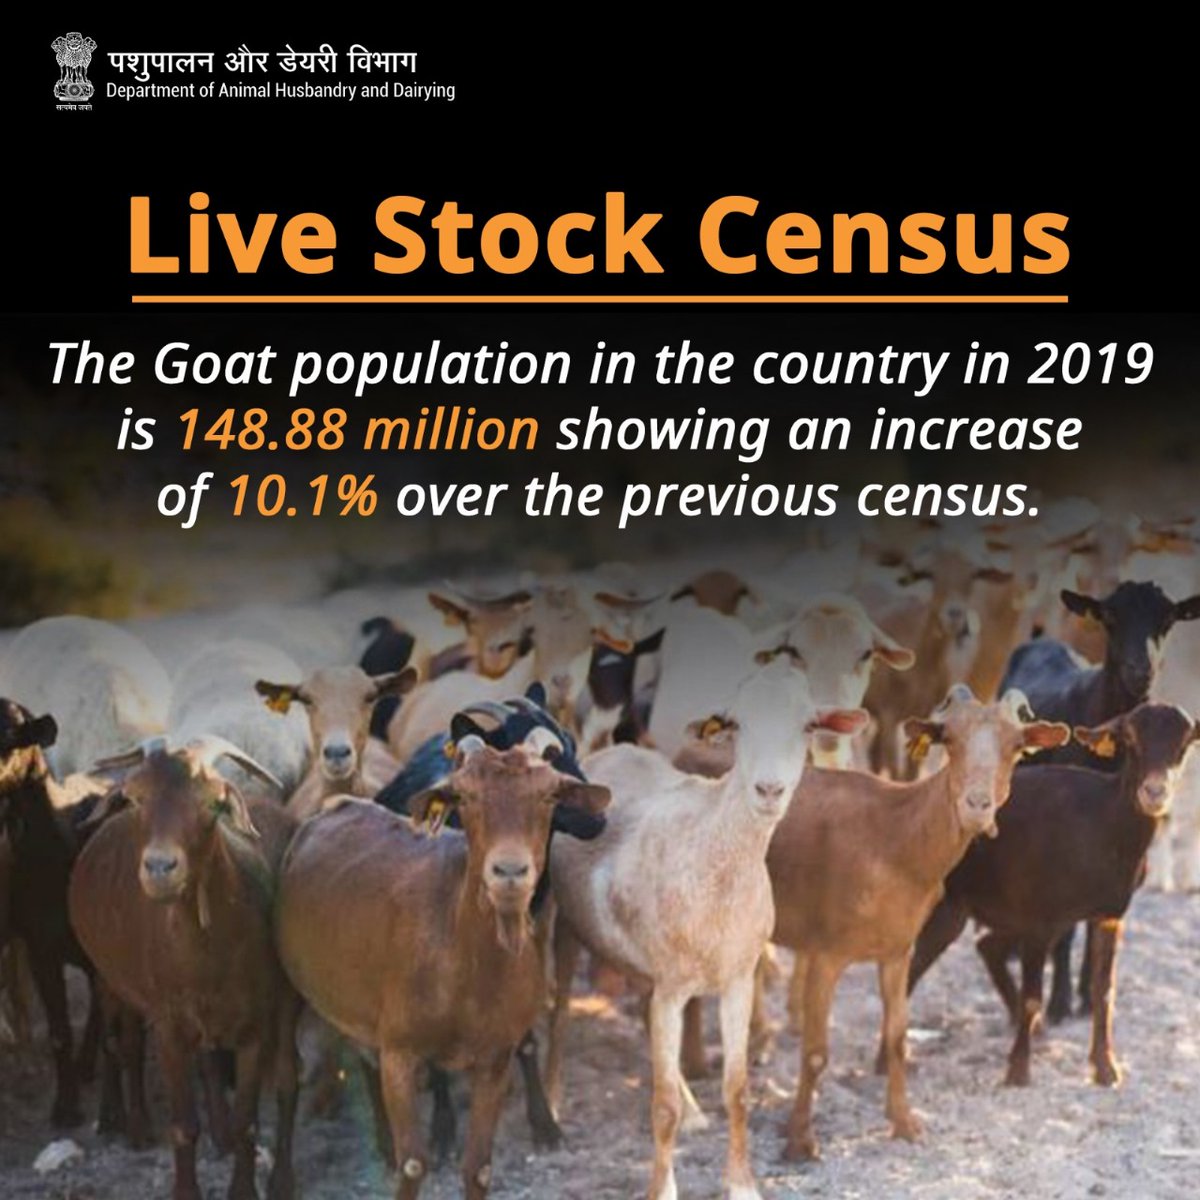 Livestock Census Update: The goat population in the country reached 148.88 million in 2019, reflecting a notable increase of 10.1% over the previous census. #LivestockCensus #GoatPopulation